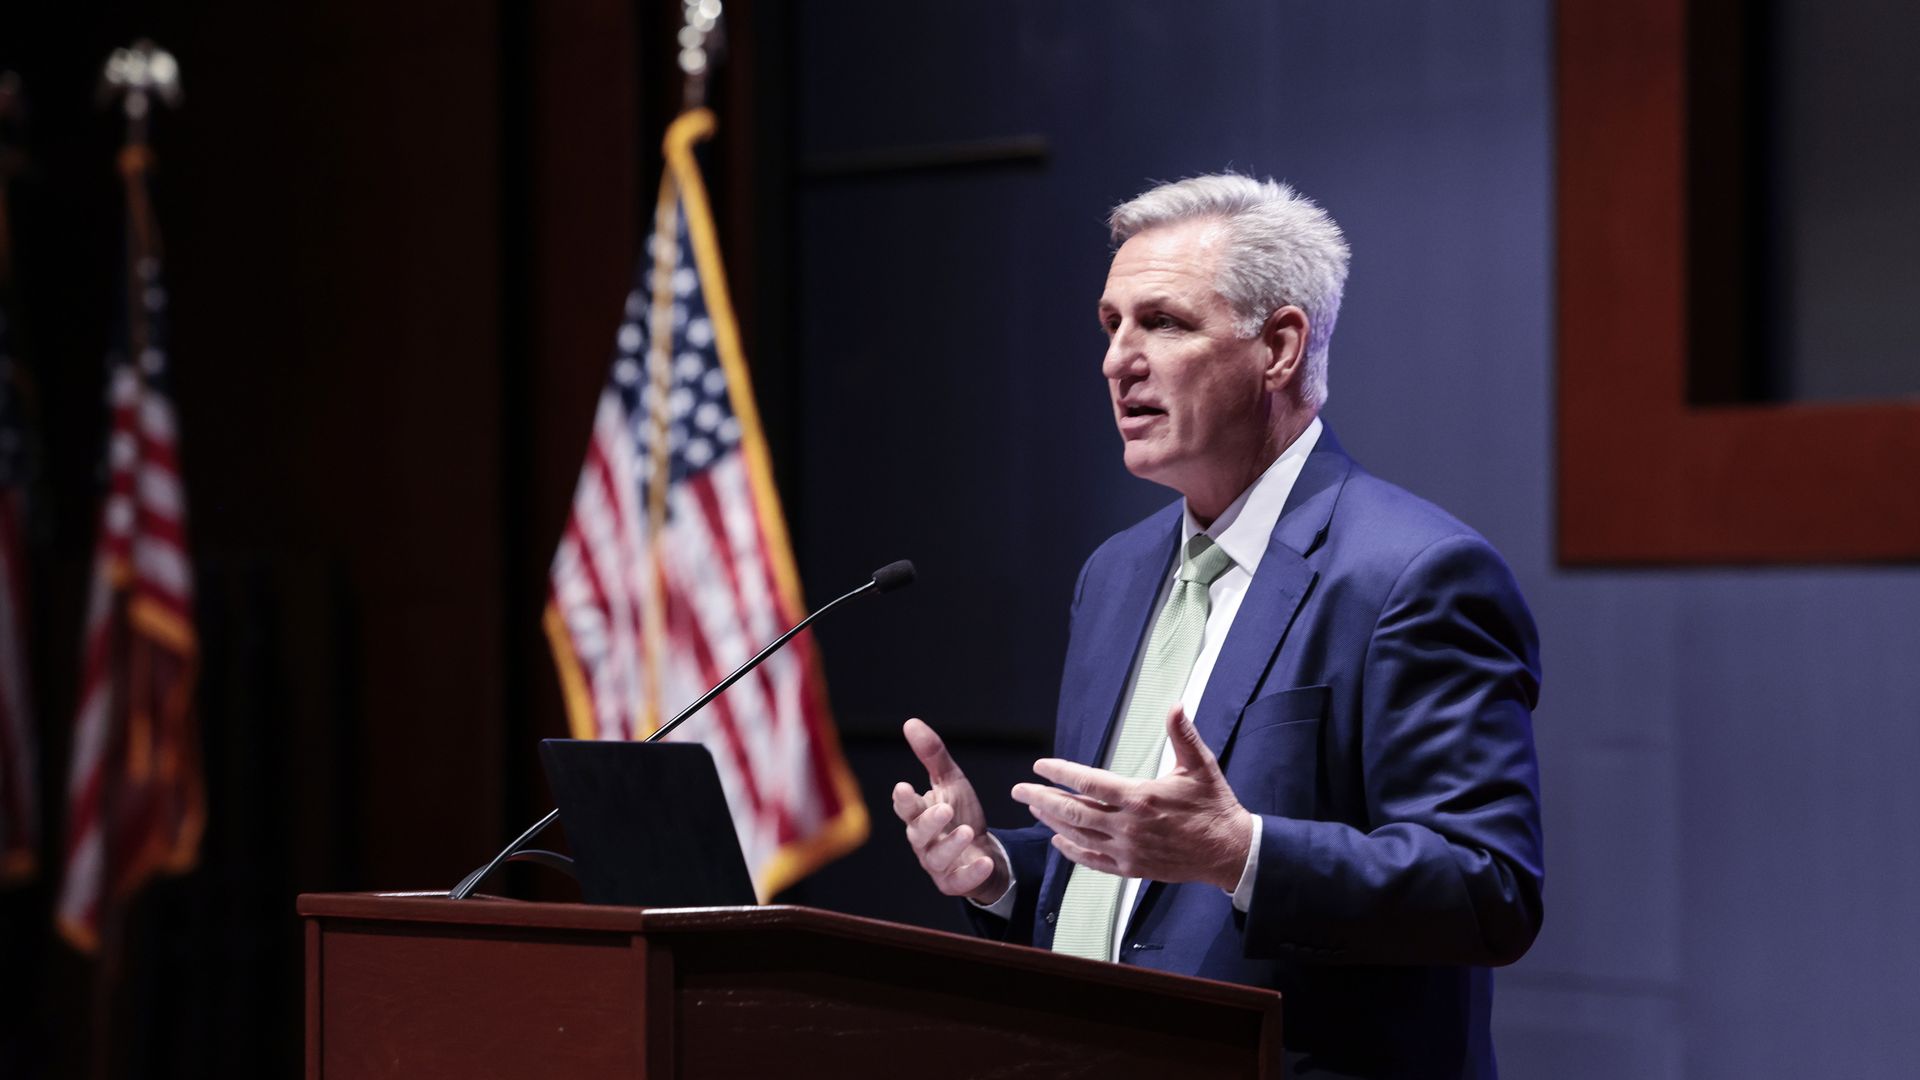 ouse Minority Leader Kevin McCarthy (R-CA) delivers remarks during the Fourth Congressional Hackathon in the auditorium of the U.S. Capitol Visitor Center on April 06, 2022